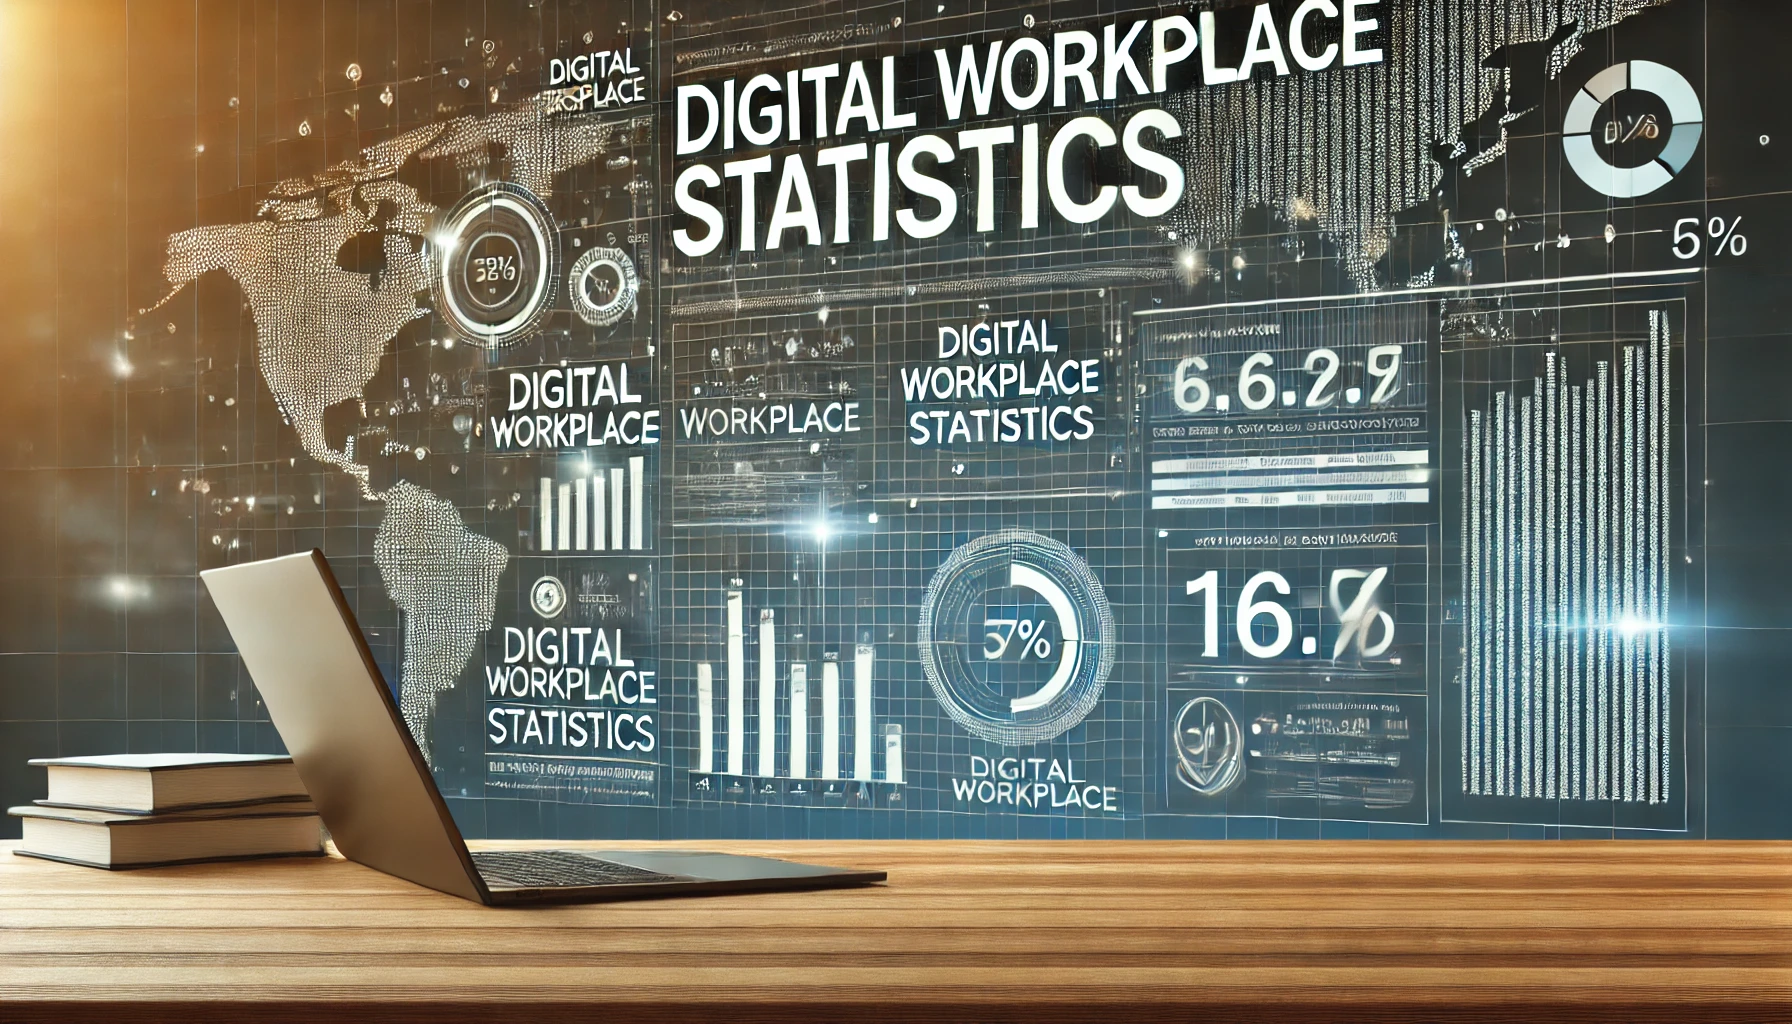 Digital Workplace Statistics By Popular Professions, Struggles Of Digital Workplace Tools, Preferred Places To Work And Market Revenue